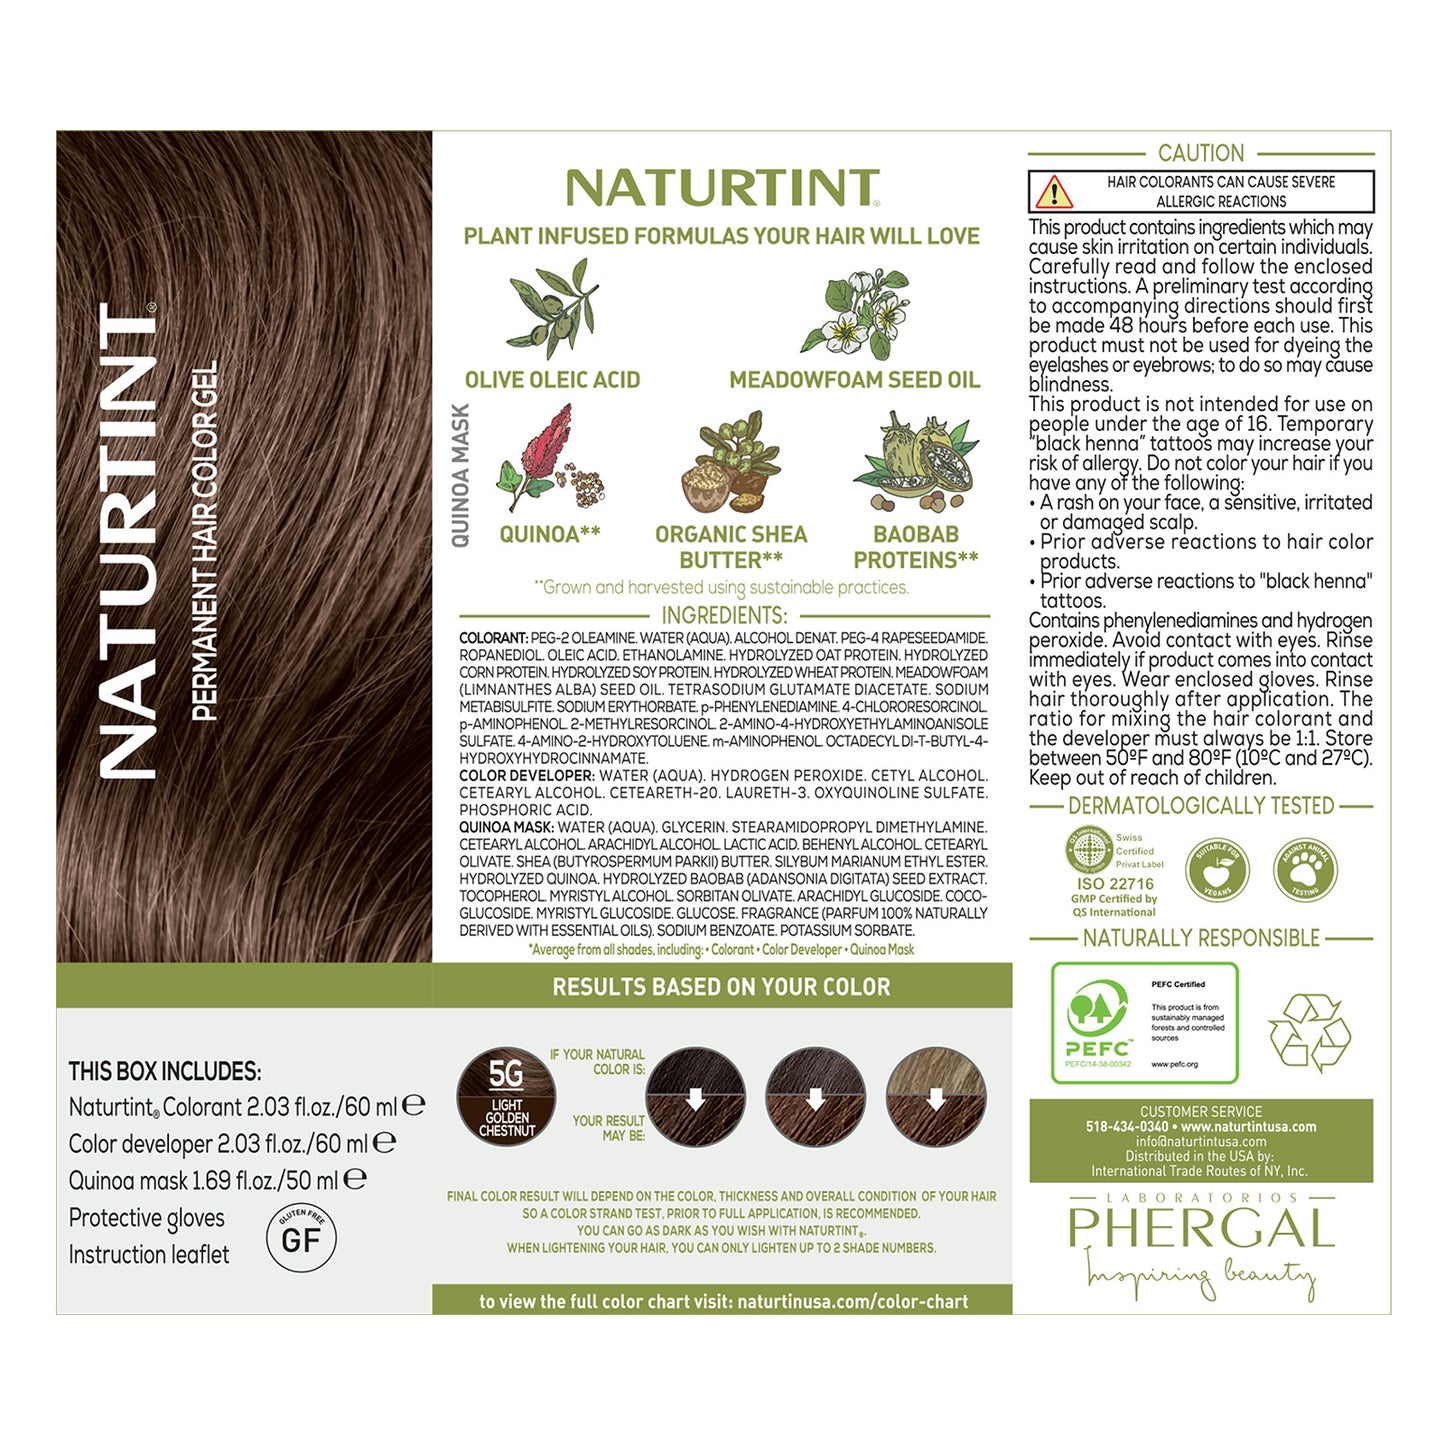 Naturtint Permanent Hair Color 5G Light Golden Chestnut (Packaging may vary)